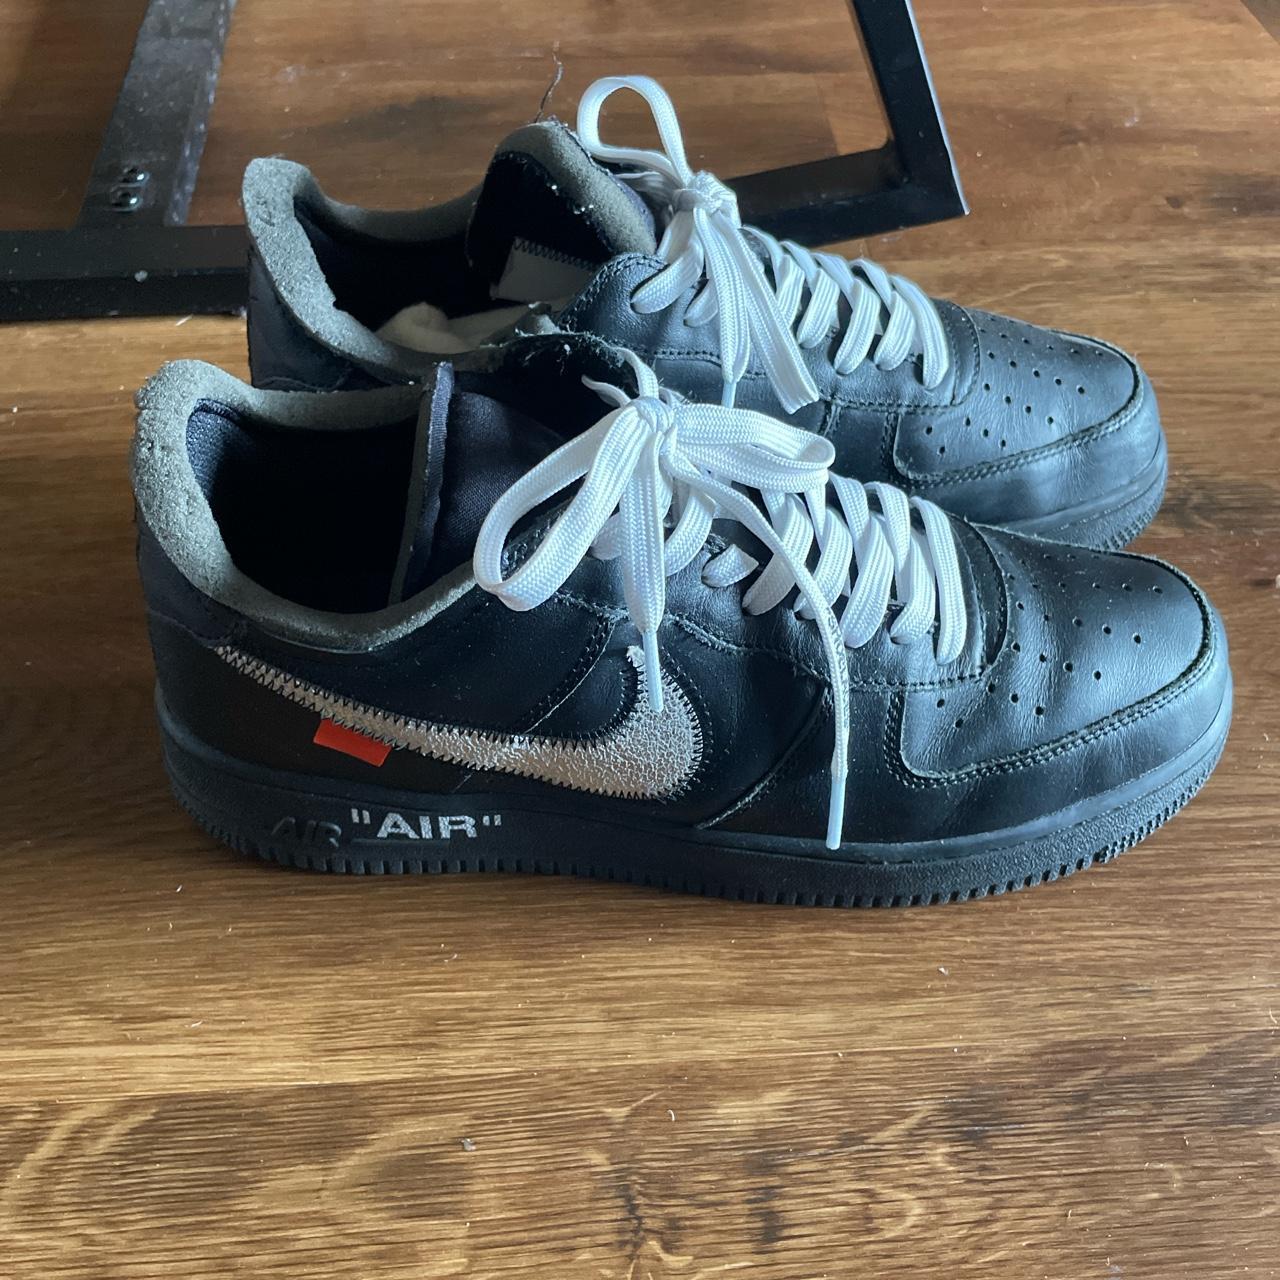 In-hand pics of the Off-White x Nike Moma I picked up this morning